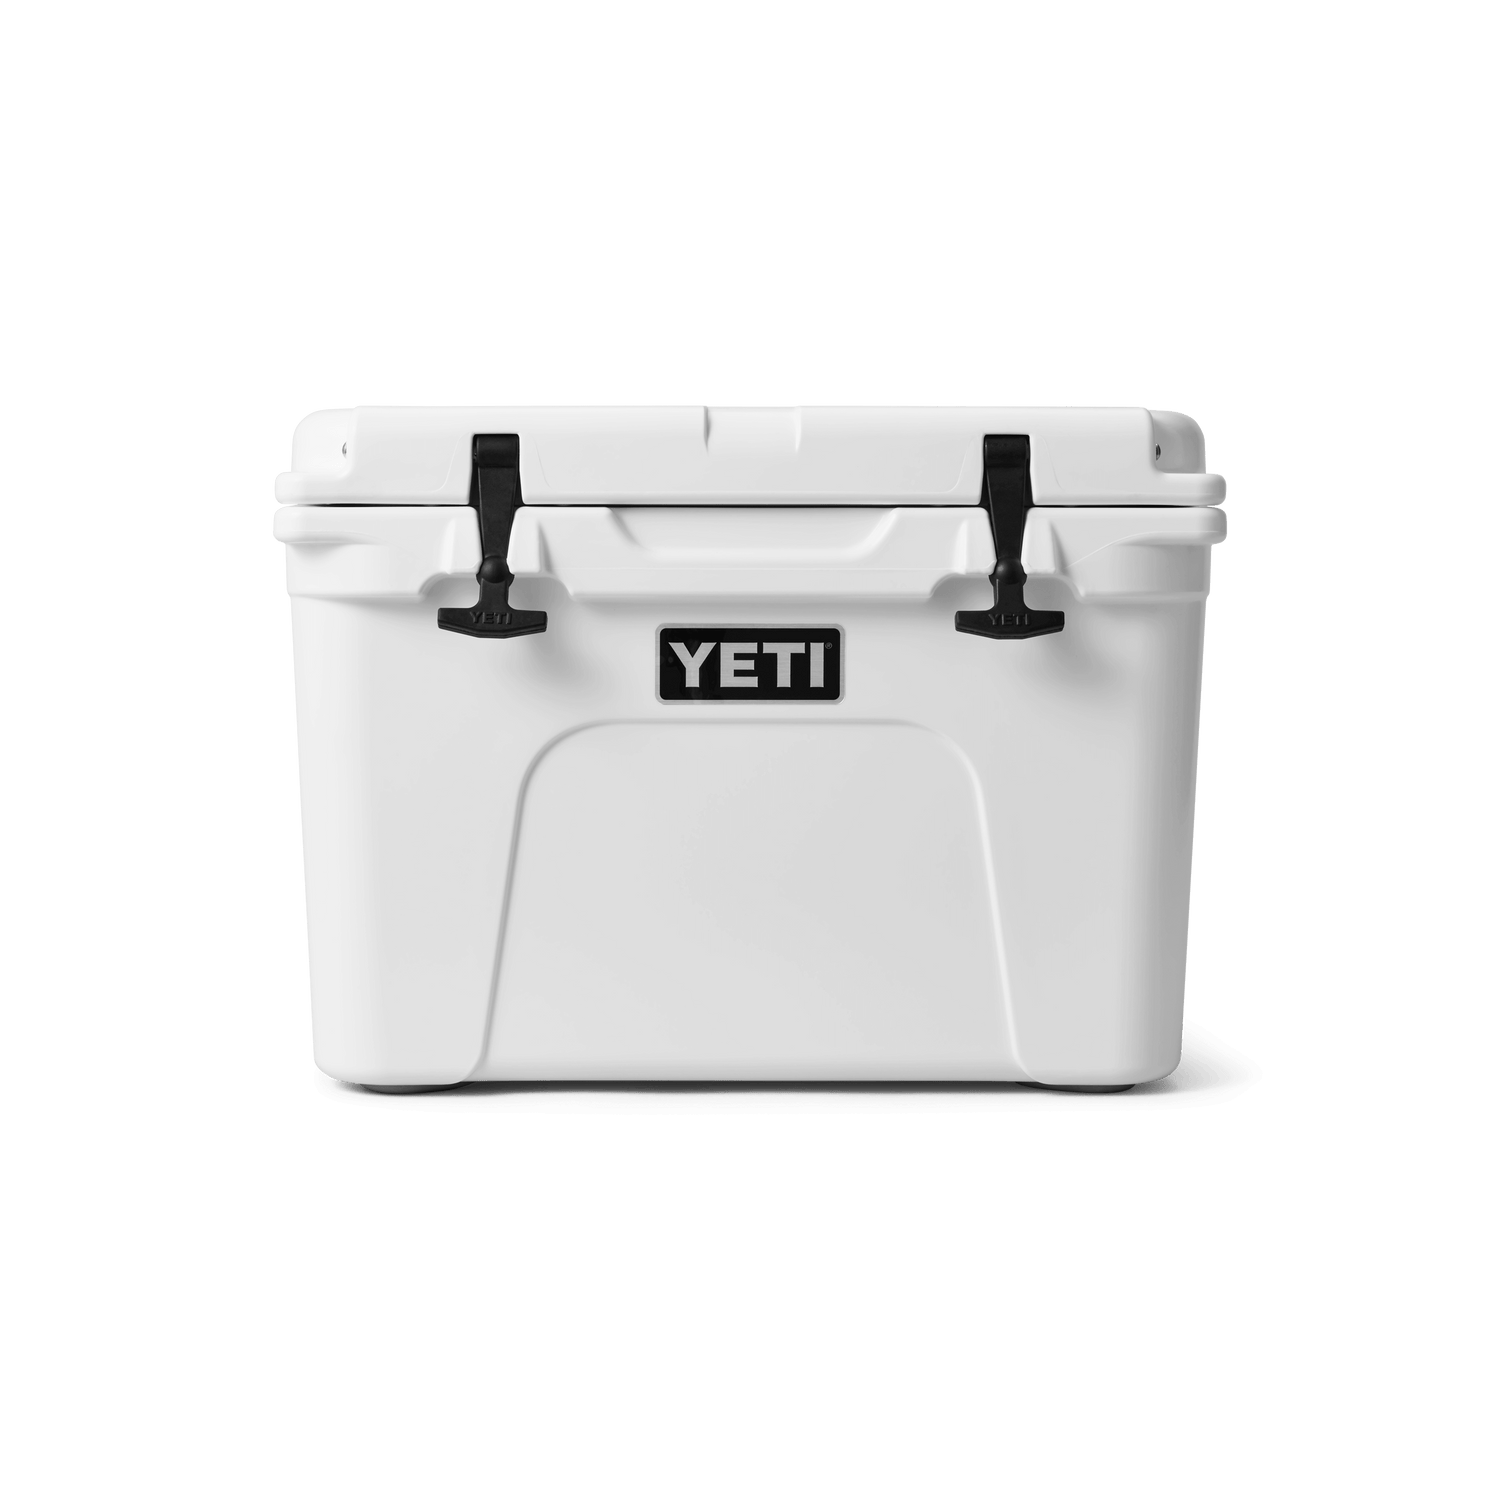 Harvest Red Collection – YETI UK LIMITED